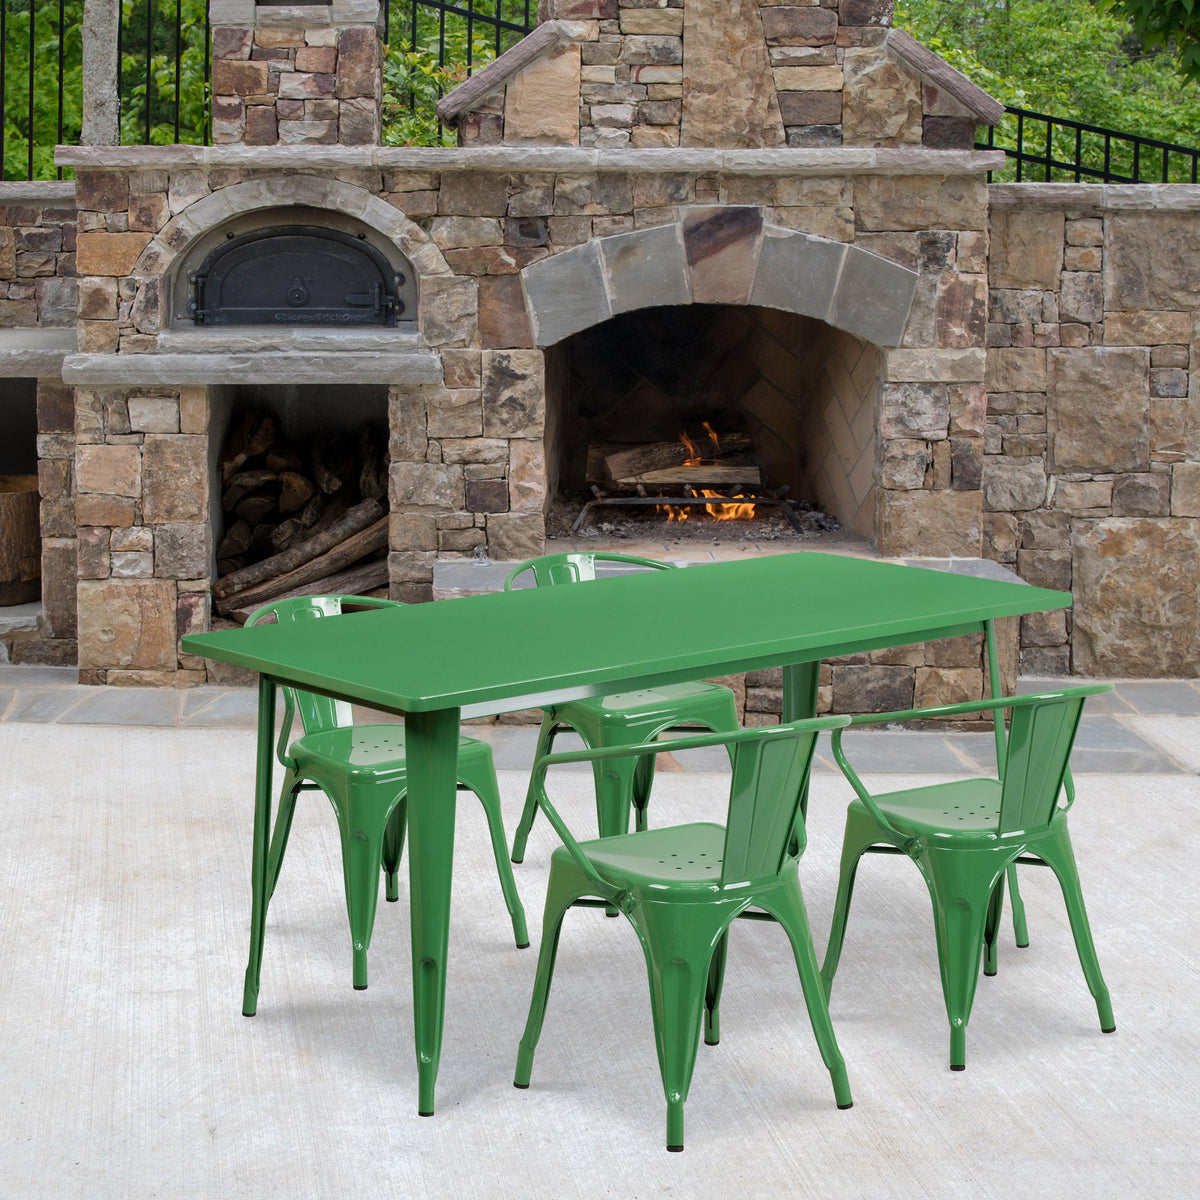 Green |#| 31.5inch x 63inch Rectangular Green Metal Indoor-Outdoor Table Set with 4 Arm Chairs